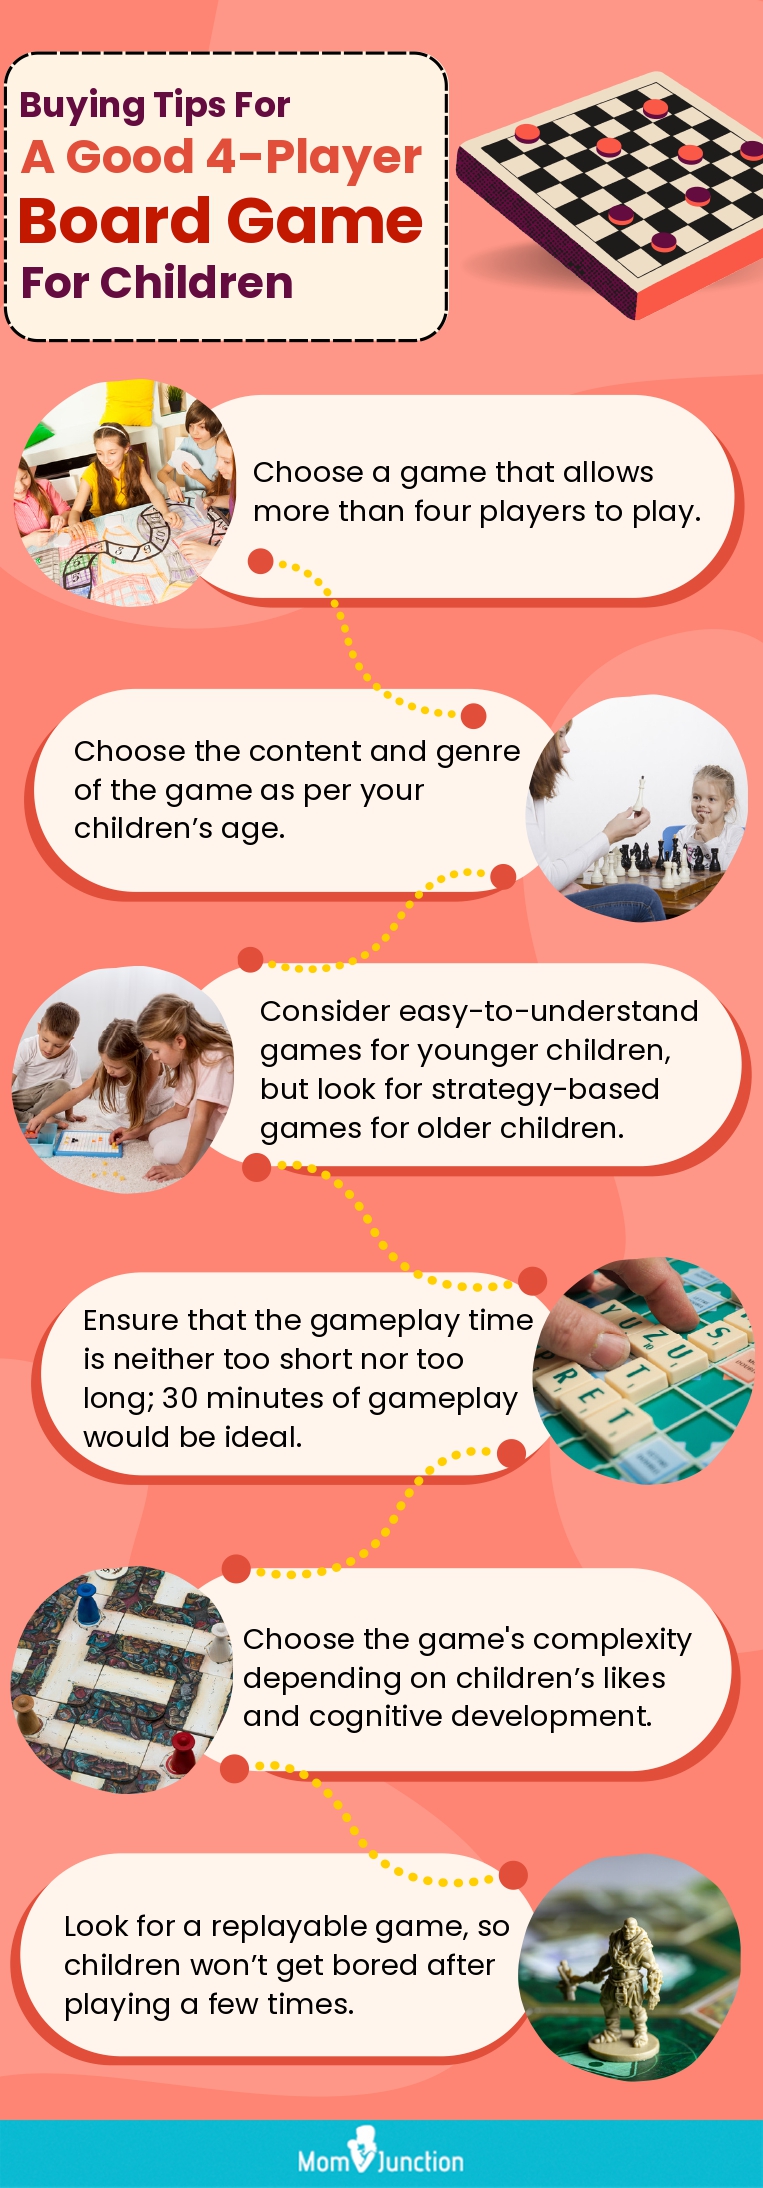 Buying Tips For A Good 4-Player Board Game For Children (infographic)